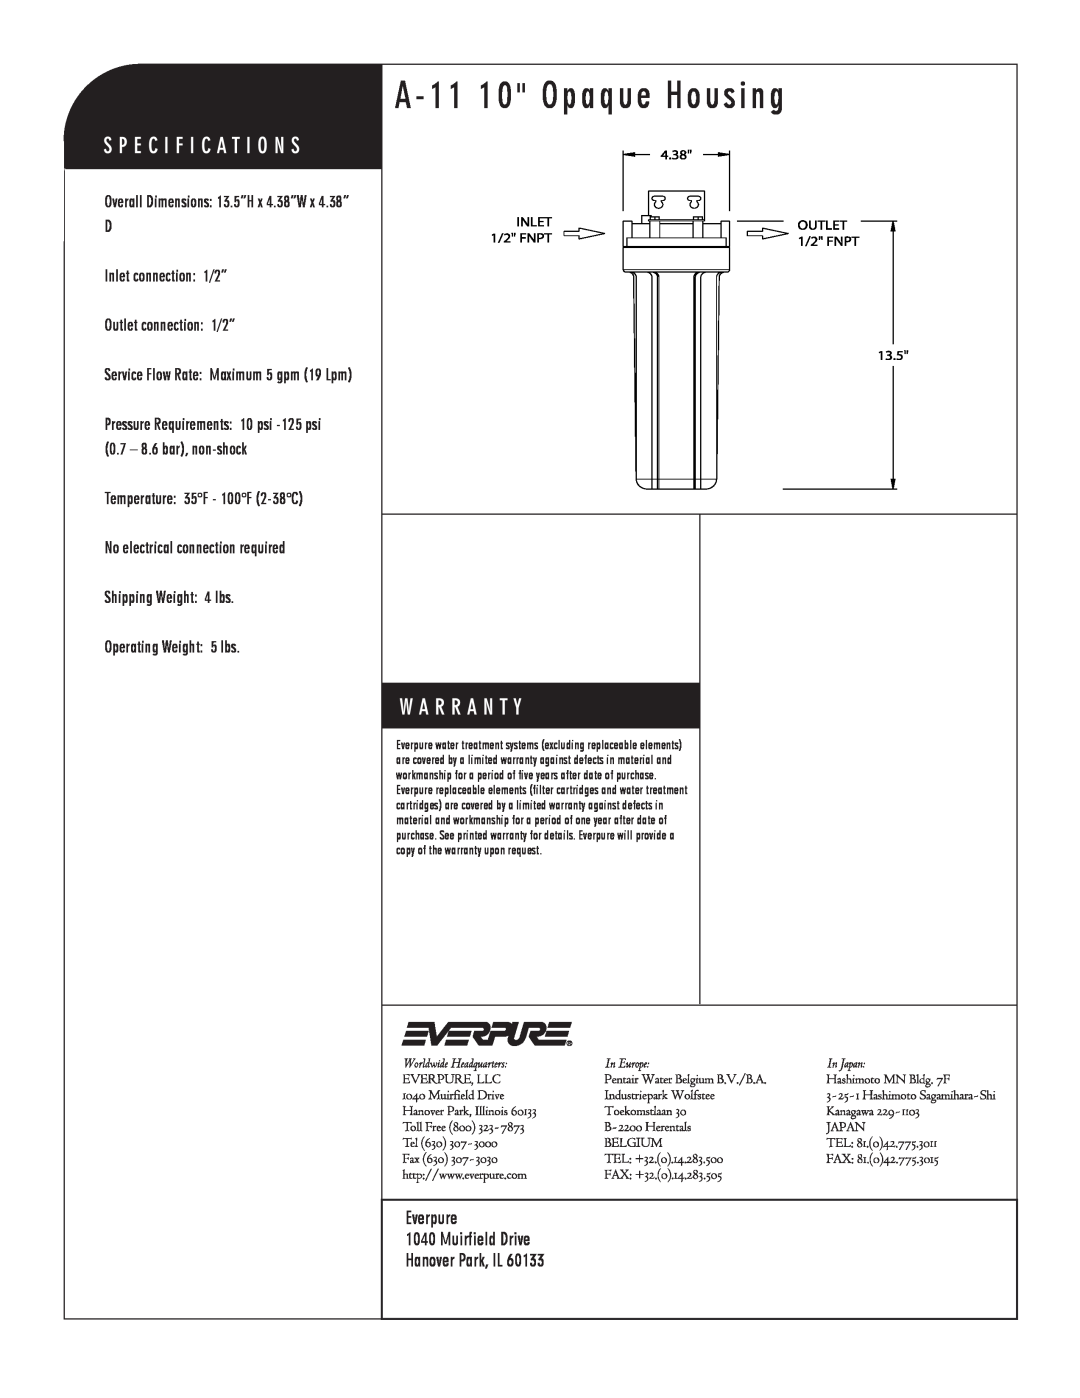 Everpure specifications A - 11 10 Opaque Housing, A-11 10 Opaque Housing, D Inlet connection 1/2” Outlet connection 1/2” 